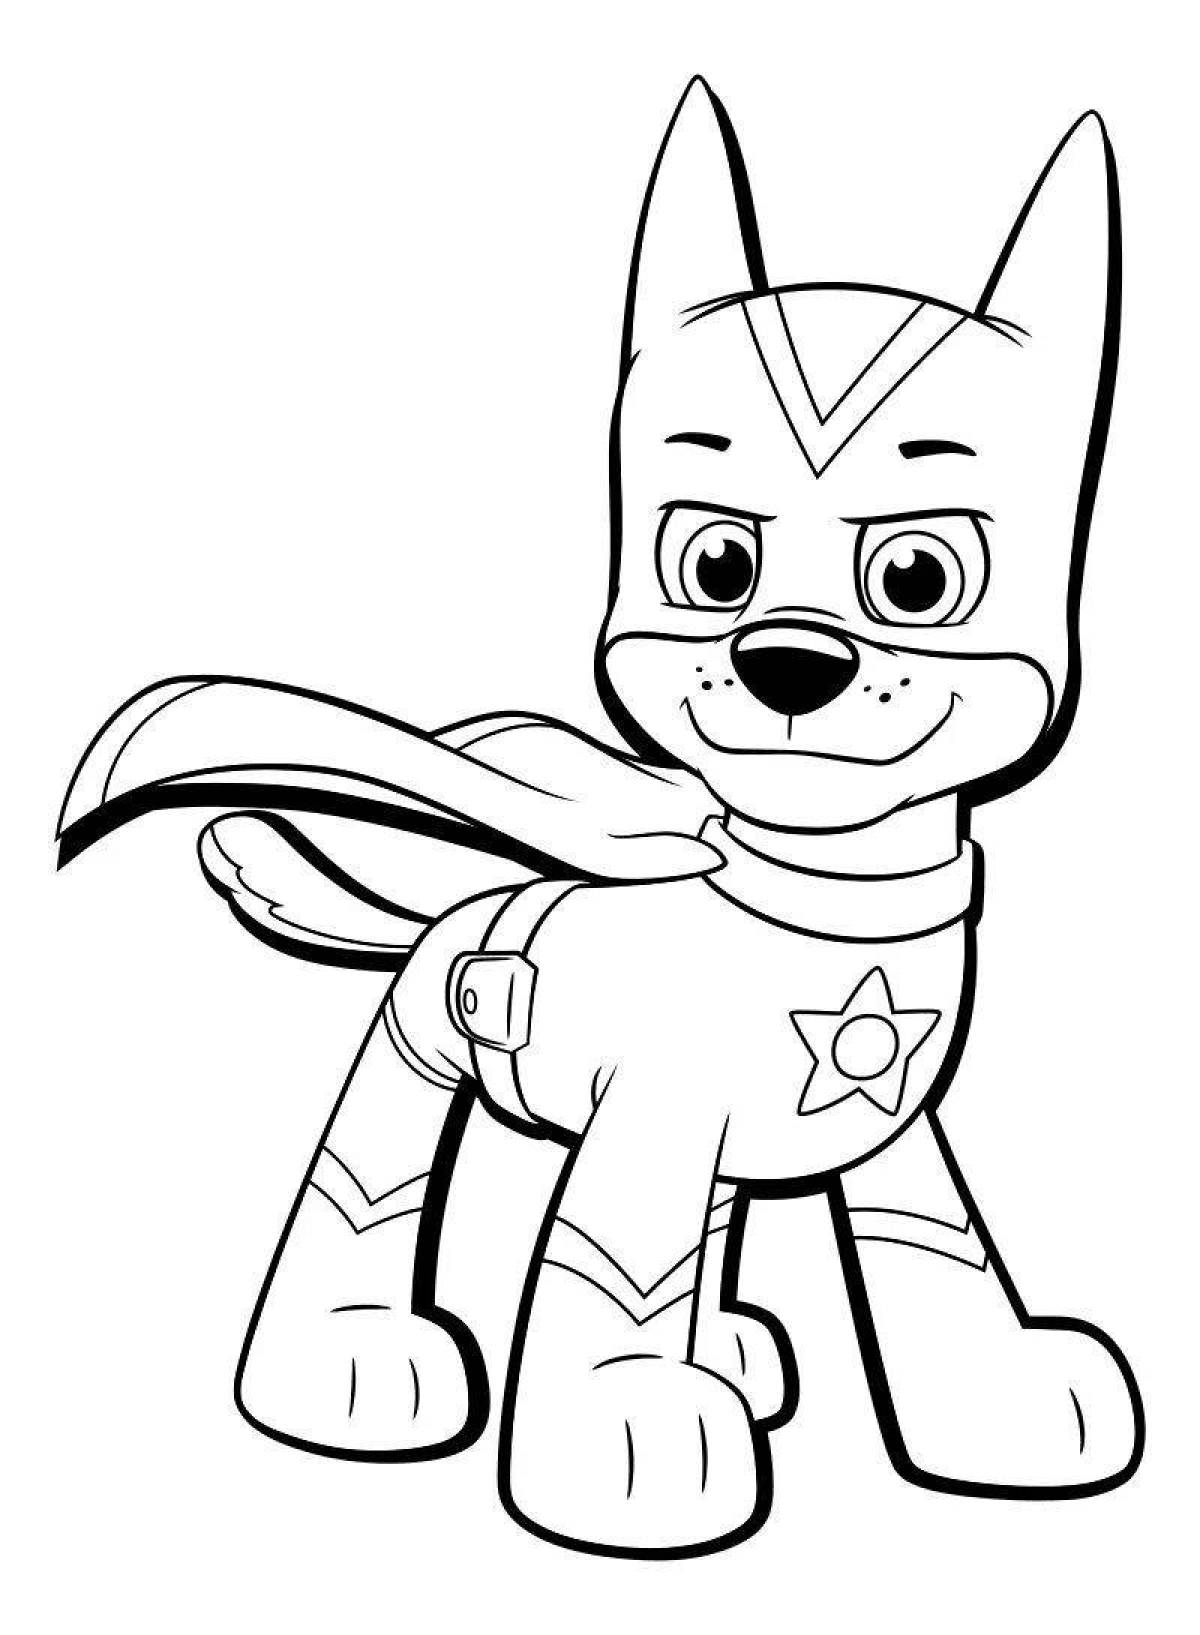 Charming coloring page paw patrol super puppies